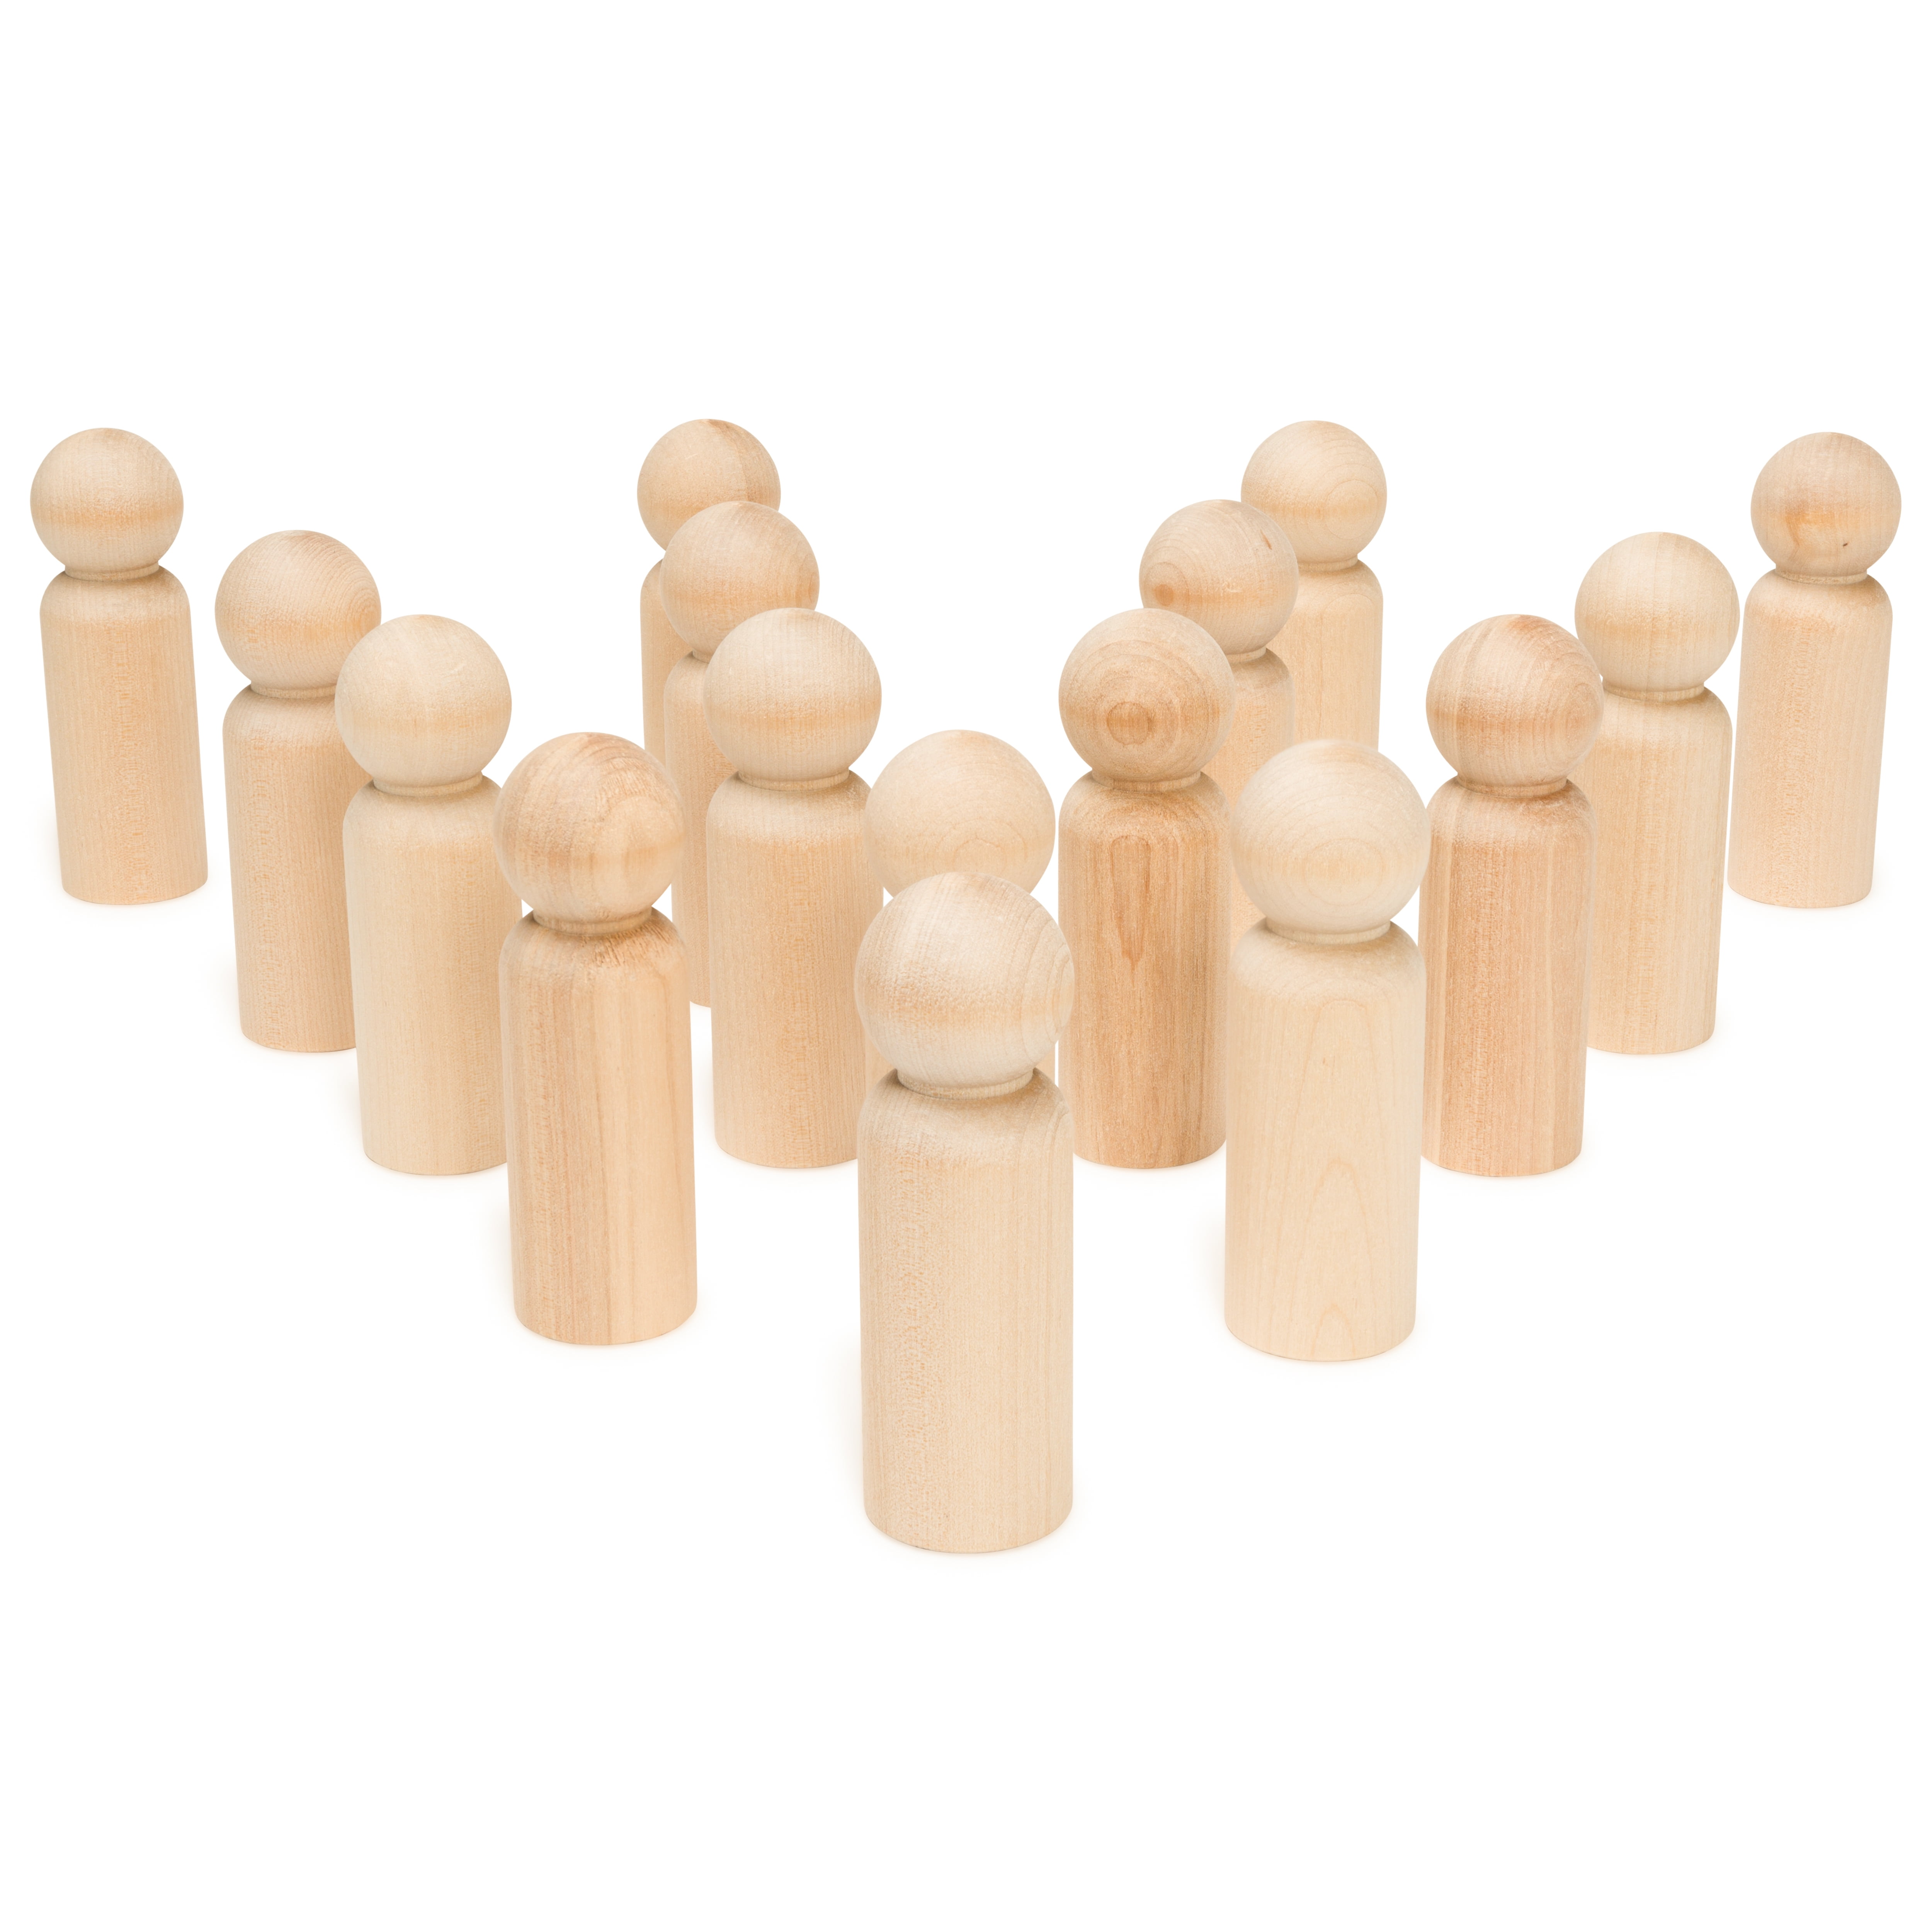 50 Pack Unfinished Wooden Peg Doll Bodies, Natural Wood Figures